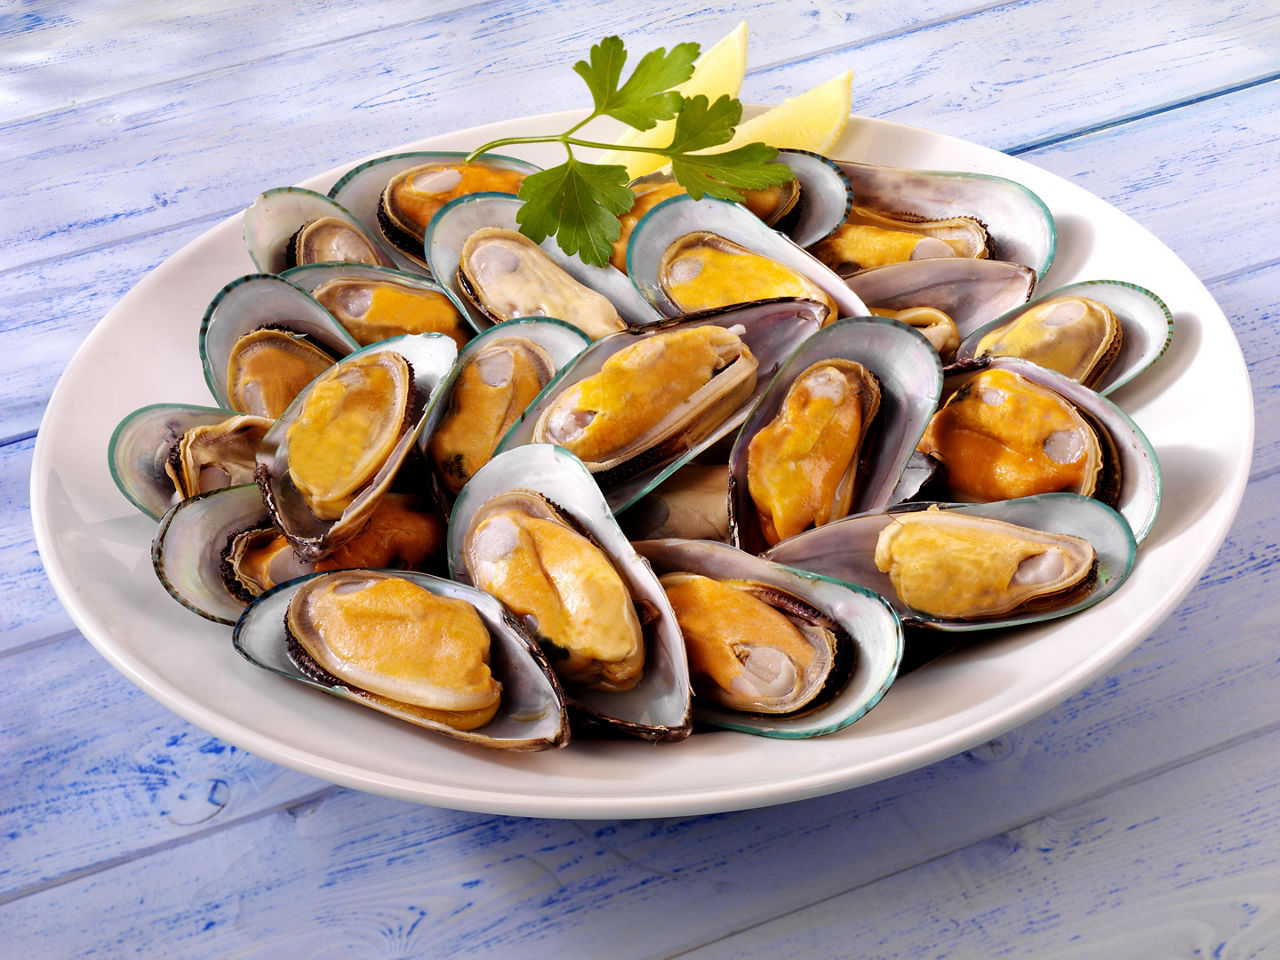 A plate full of New Zealand green mussels